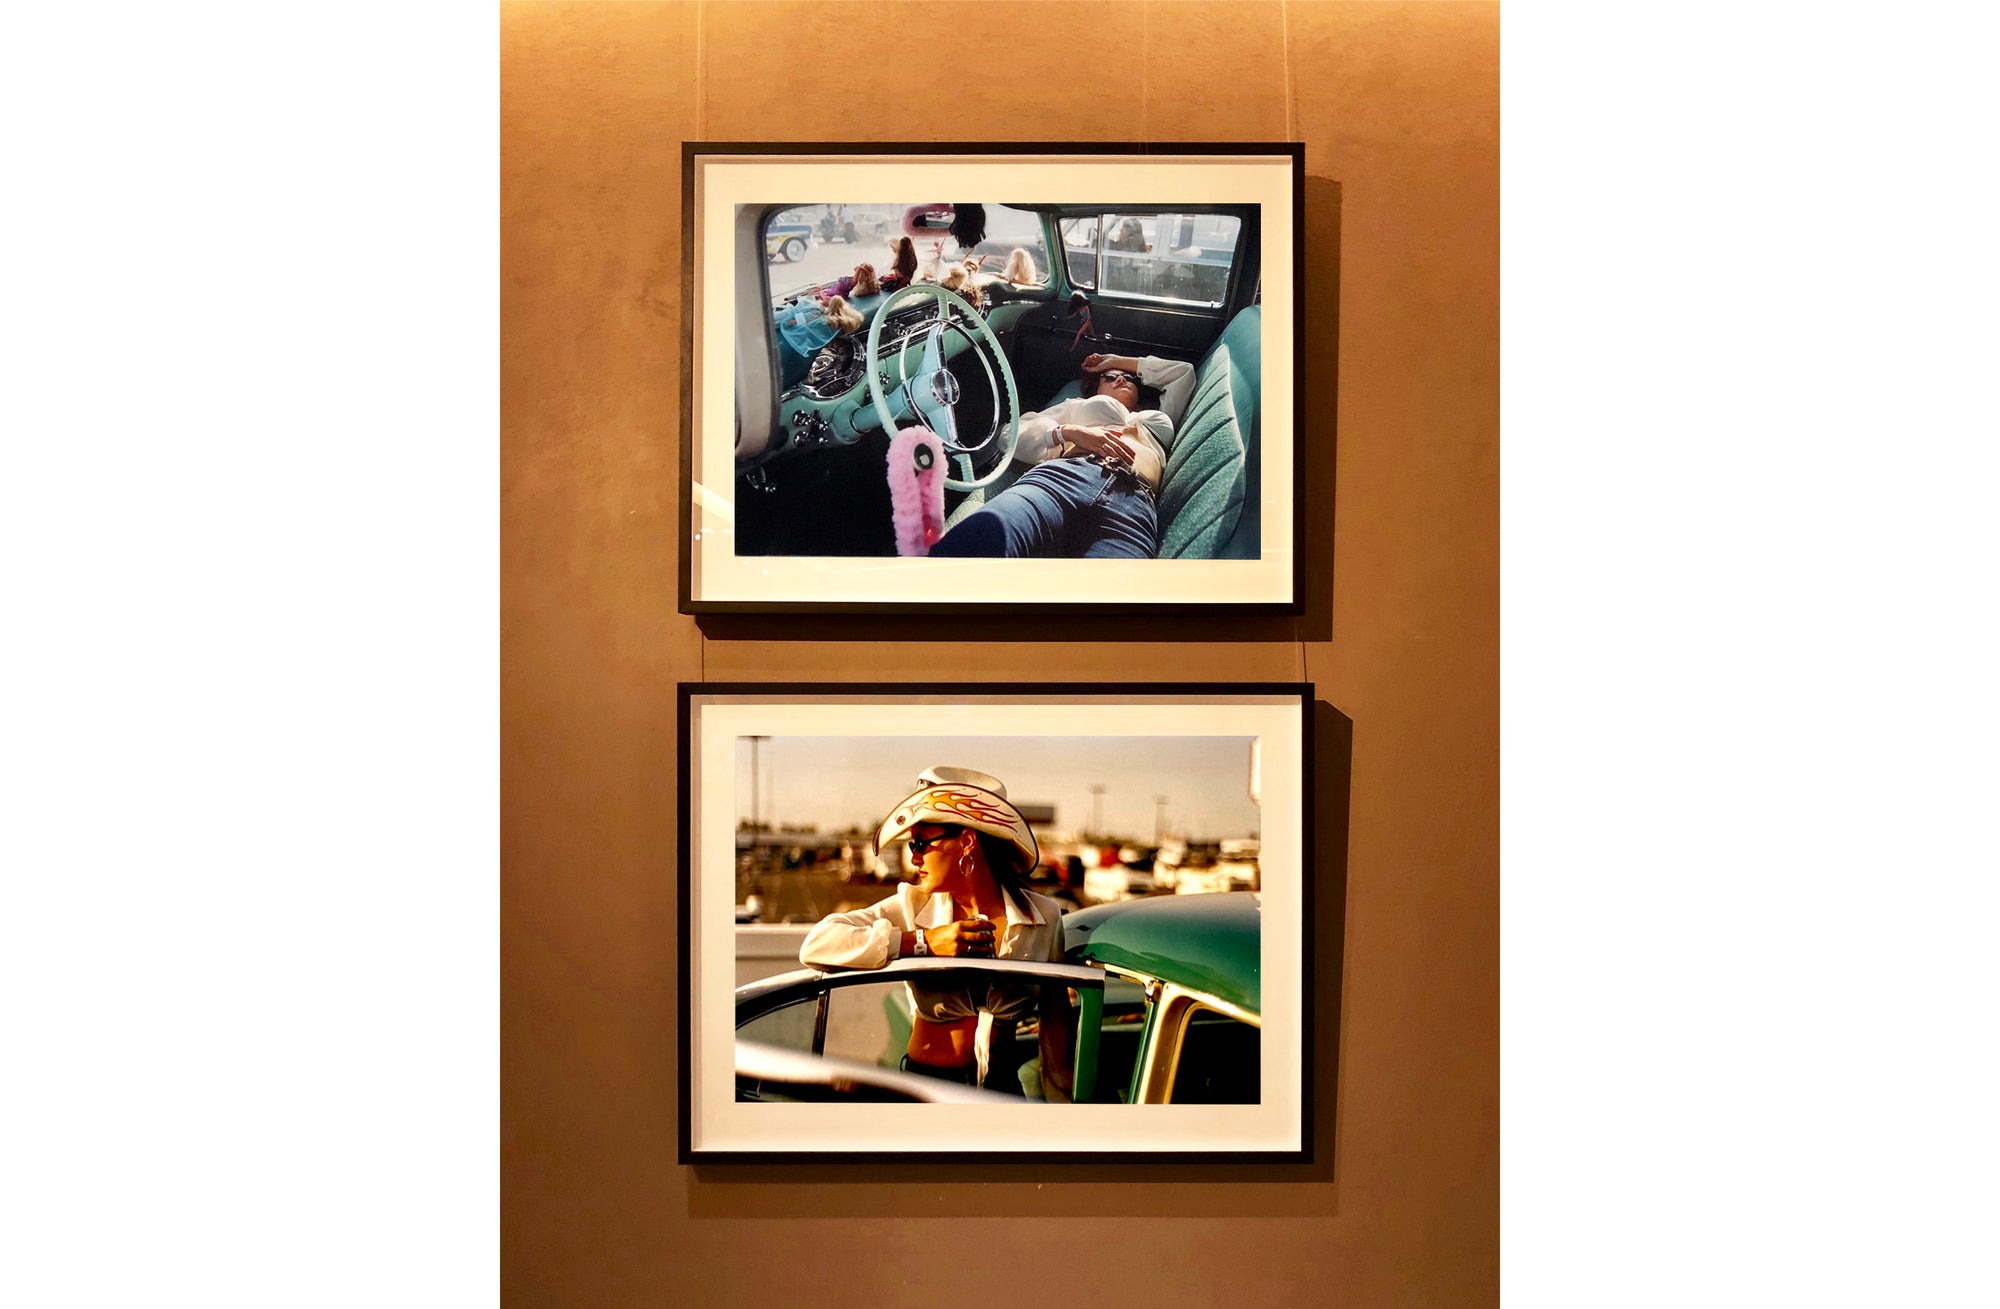 'Sun Kissed Wendy', from Richard Heeps' 'Man's Ruin' Series. This piece is part of a sequence of artworks capturing Wendy at the Rockabilly Weekender, Viva Las Vegas. This cinematic portrait of Wendy captures her kissed by the sunset.